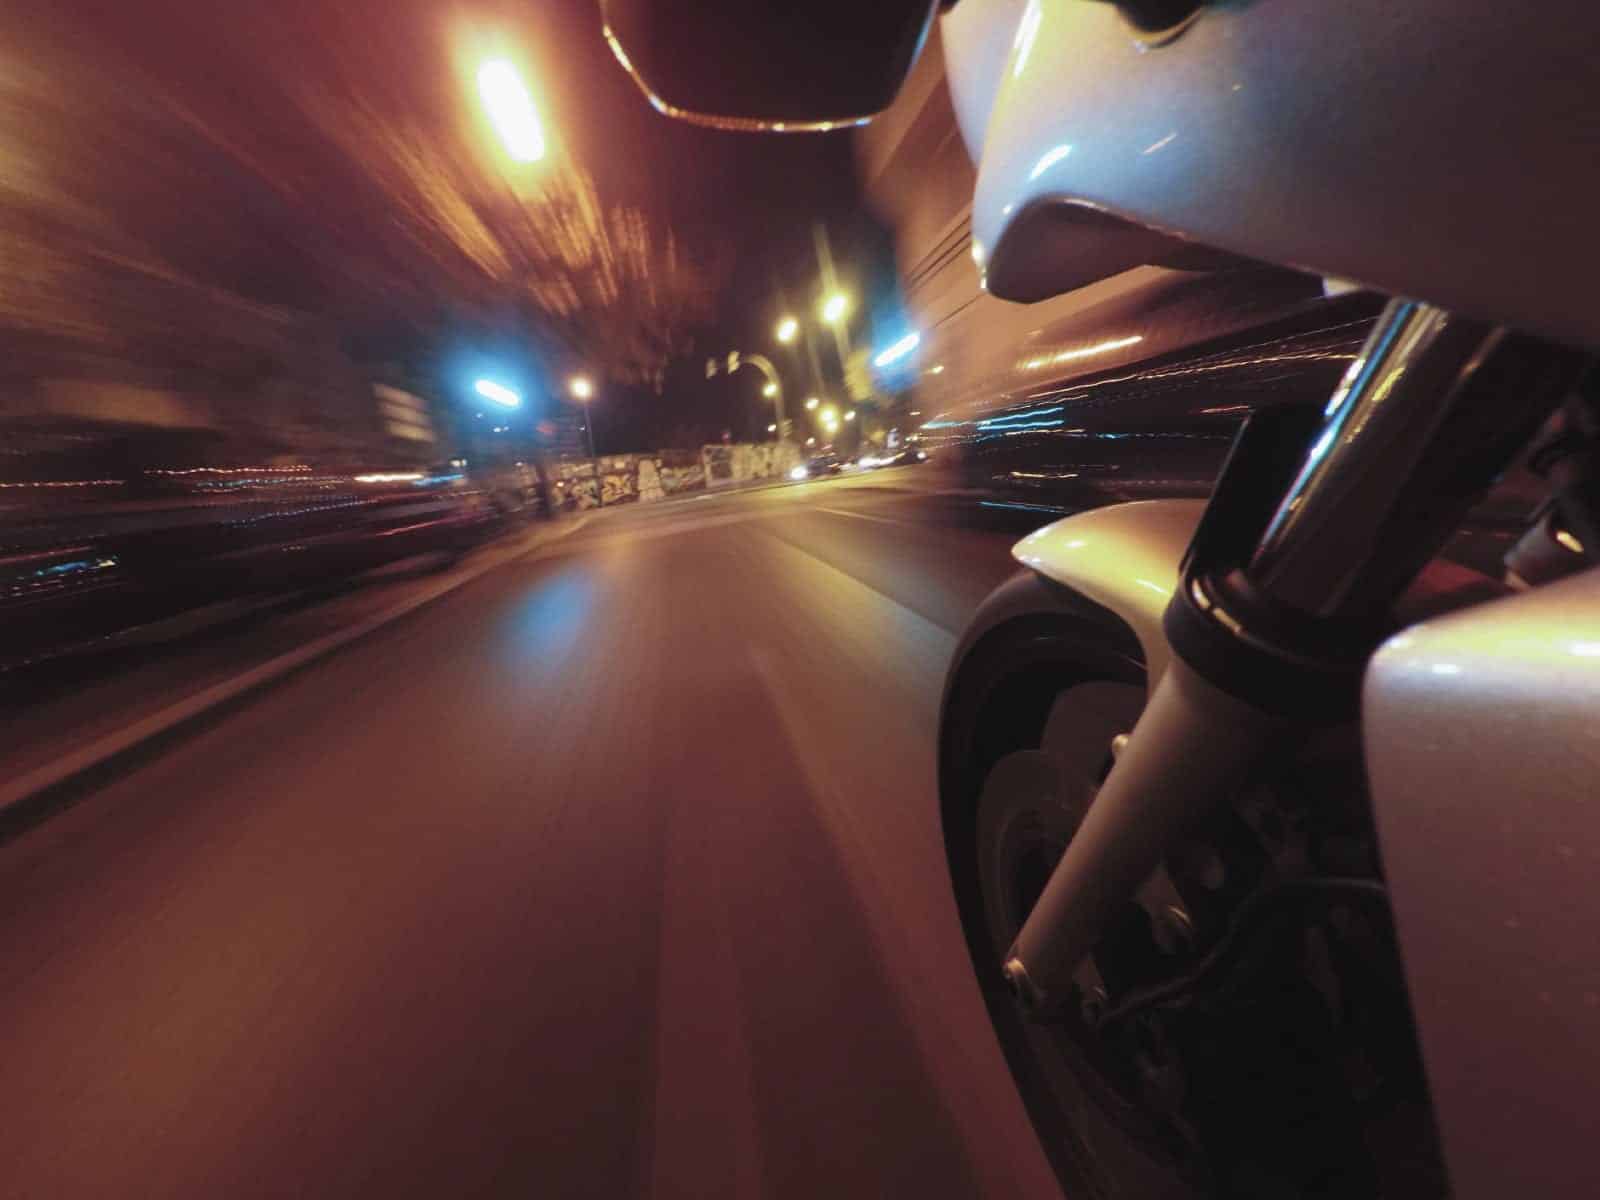 Four Night Riding Motorcycle Safety Tips | Heuser & Heuser, LLP